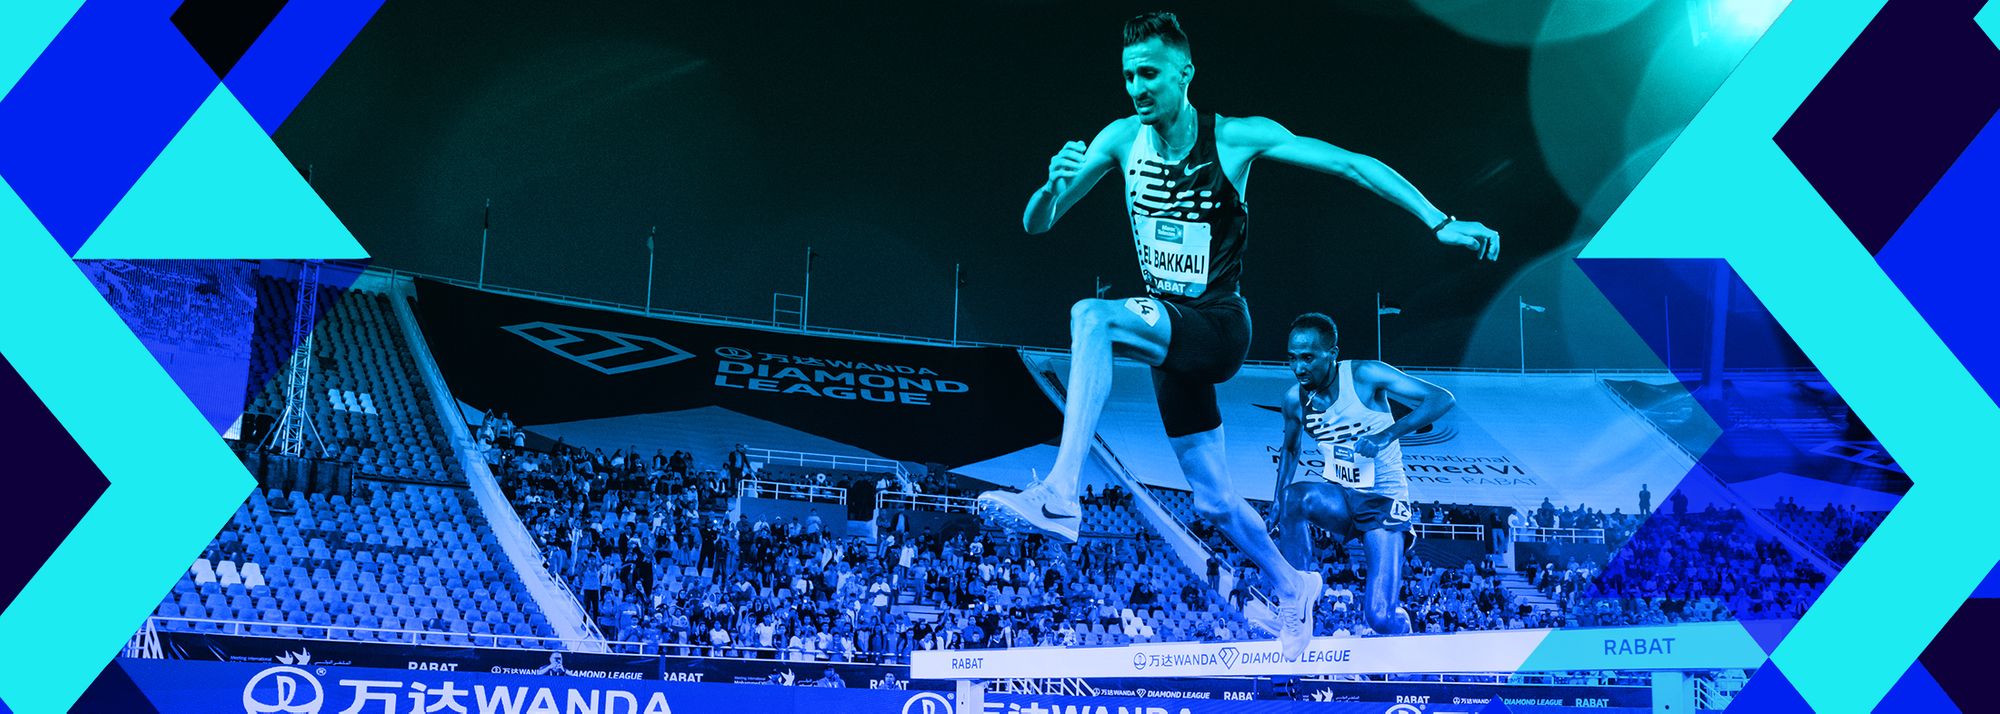 The Wanda Diamond League continues on Sunday in Marrakech with the fourth meeting of the season